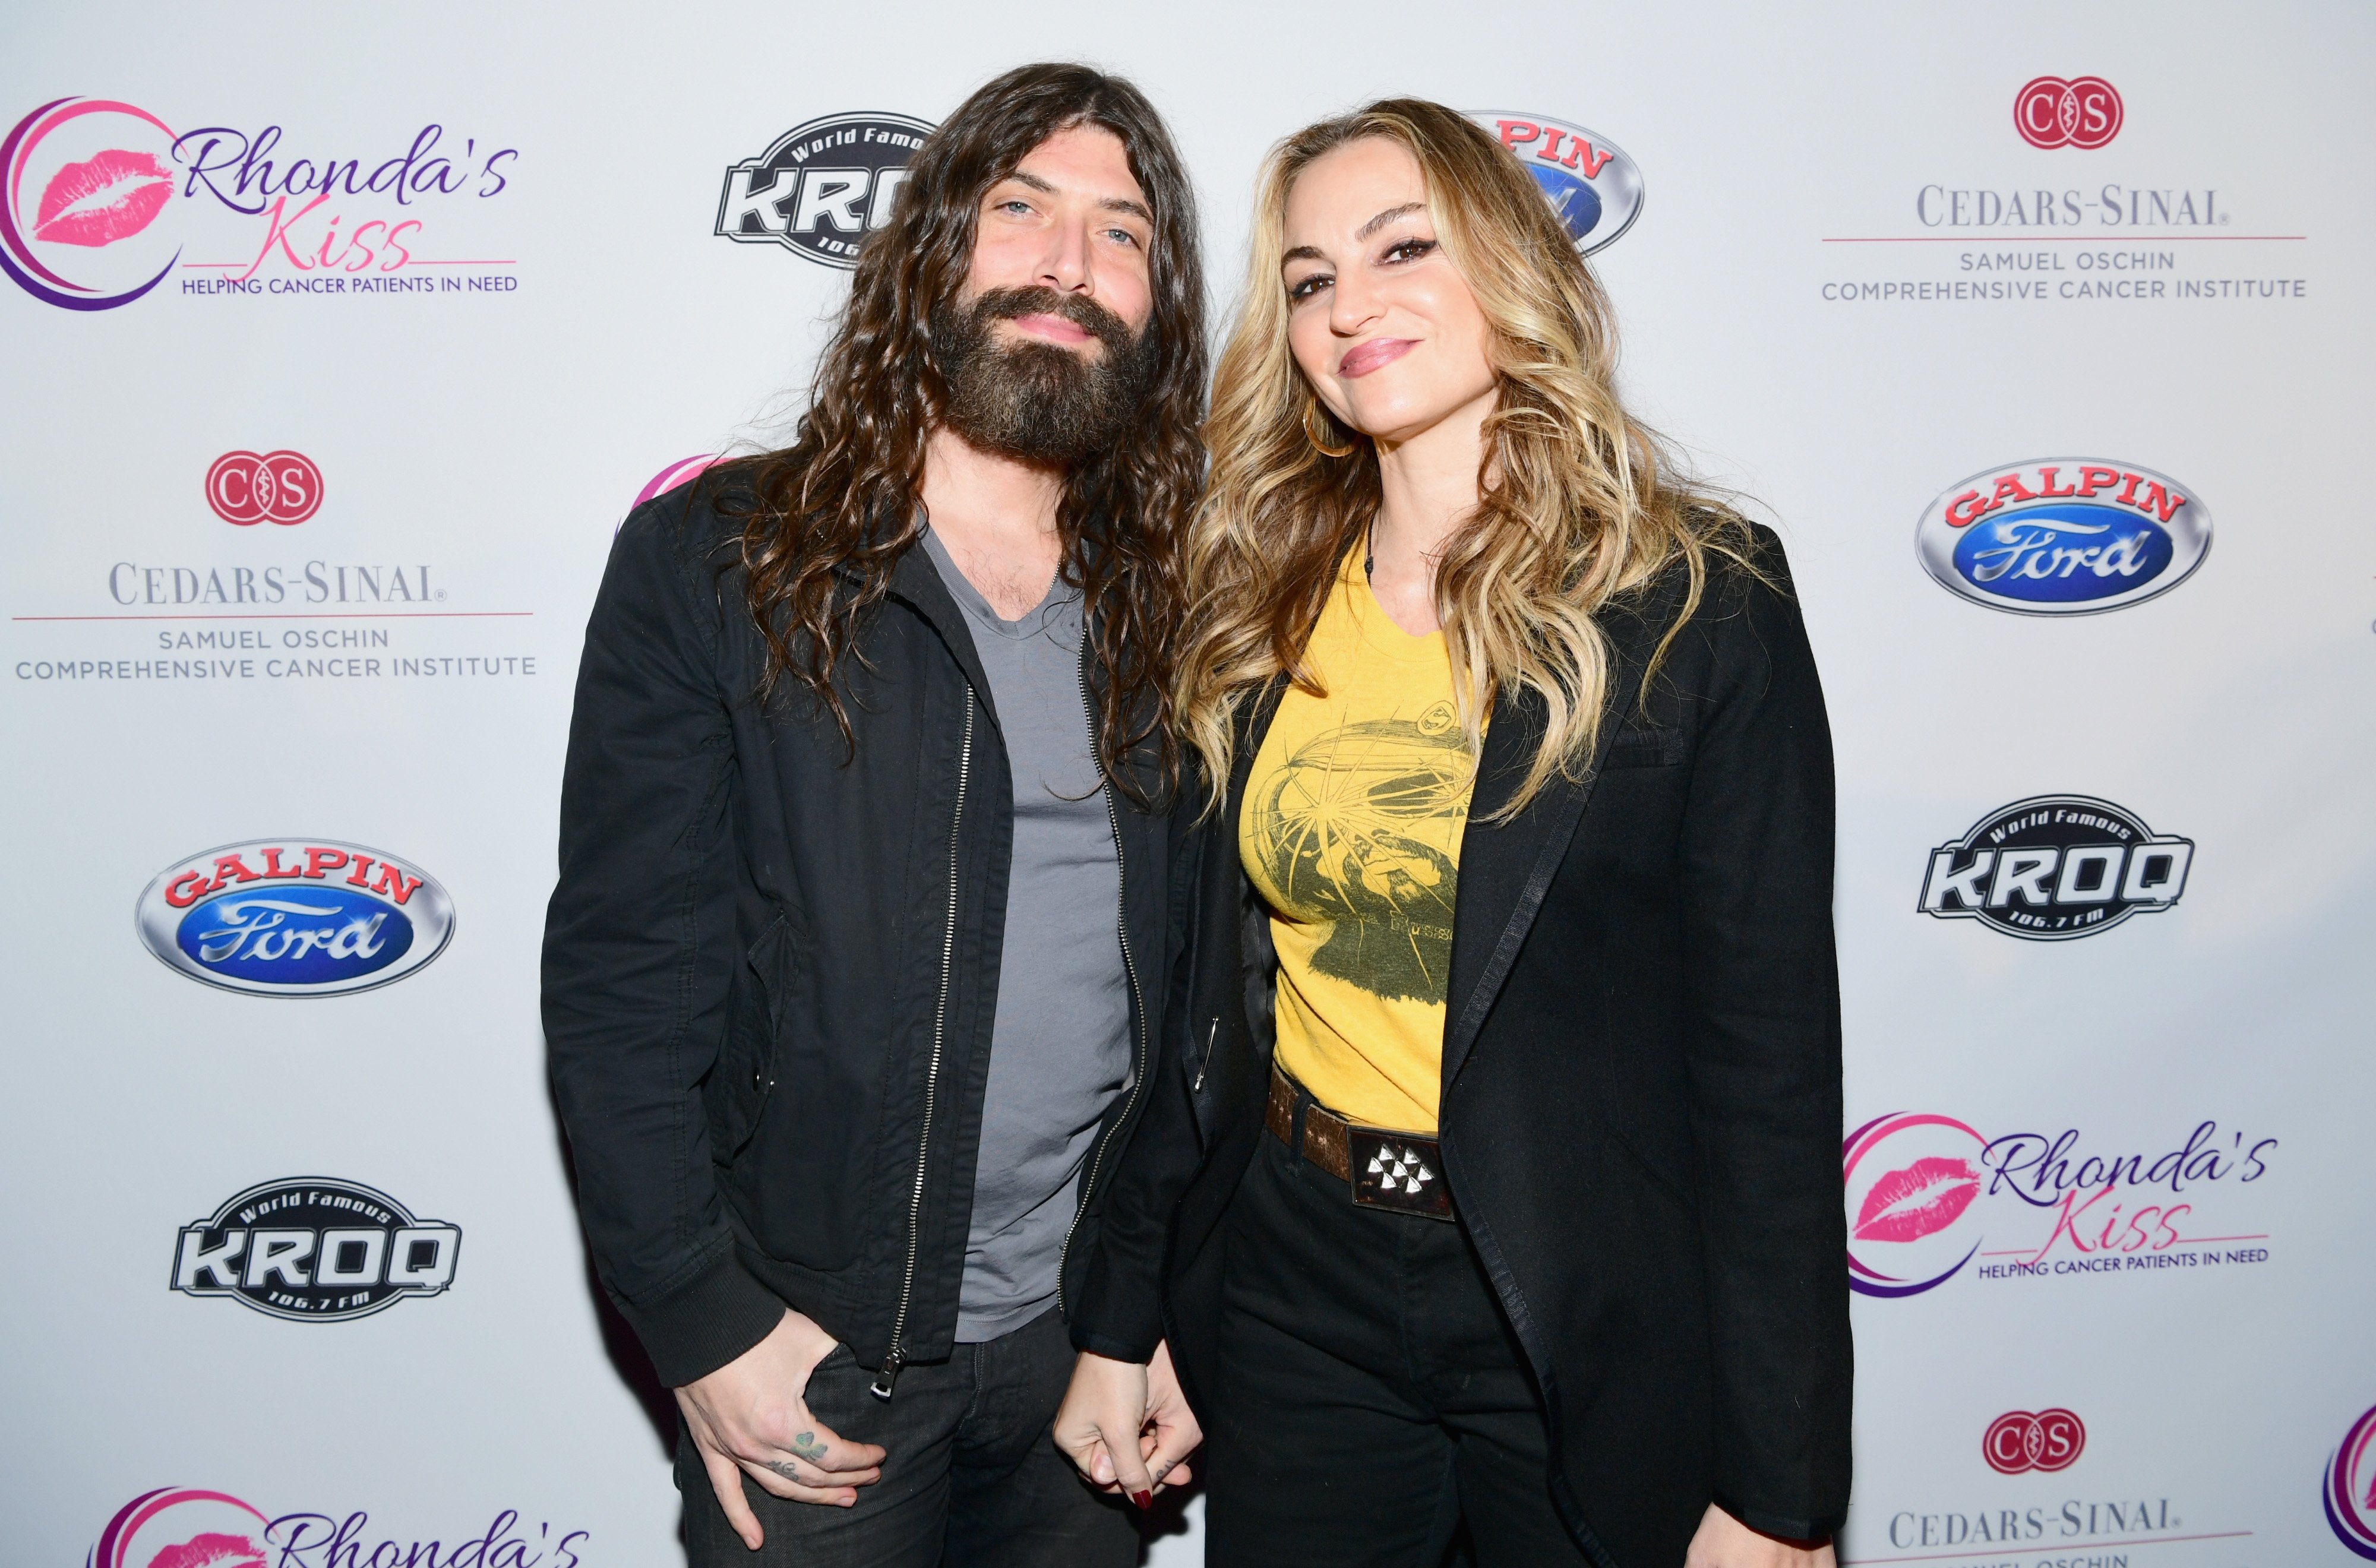 Michael Devin (L) and Drea de Matteo attend the 2017 Rhonda's Kiss Benefit Concert at Hollywood Palladium on December 8, 2017, in Los Angeles, California. | Source: Getty Images.